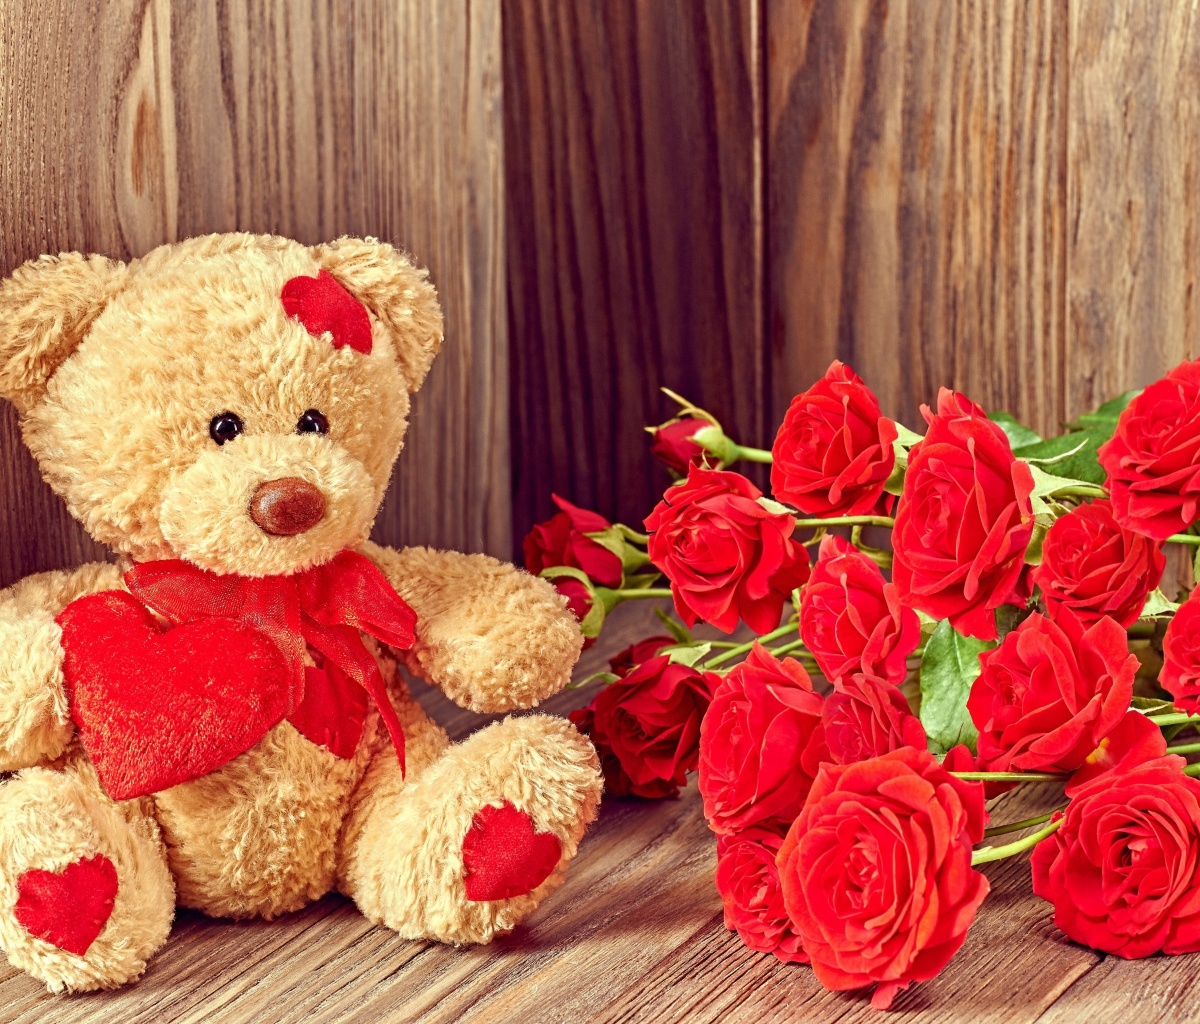 Brodwn Teddy Bear Gift for Saint Valentines Day wallpaper 1200x1024